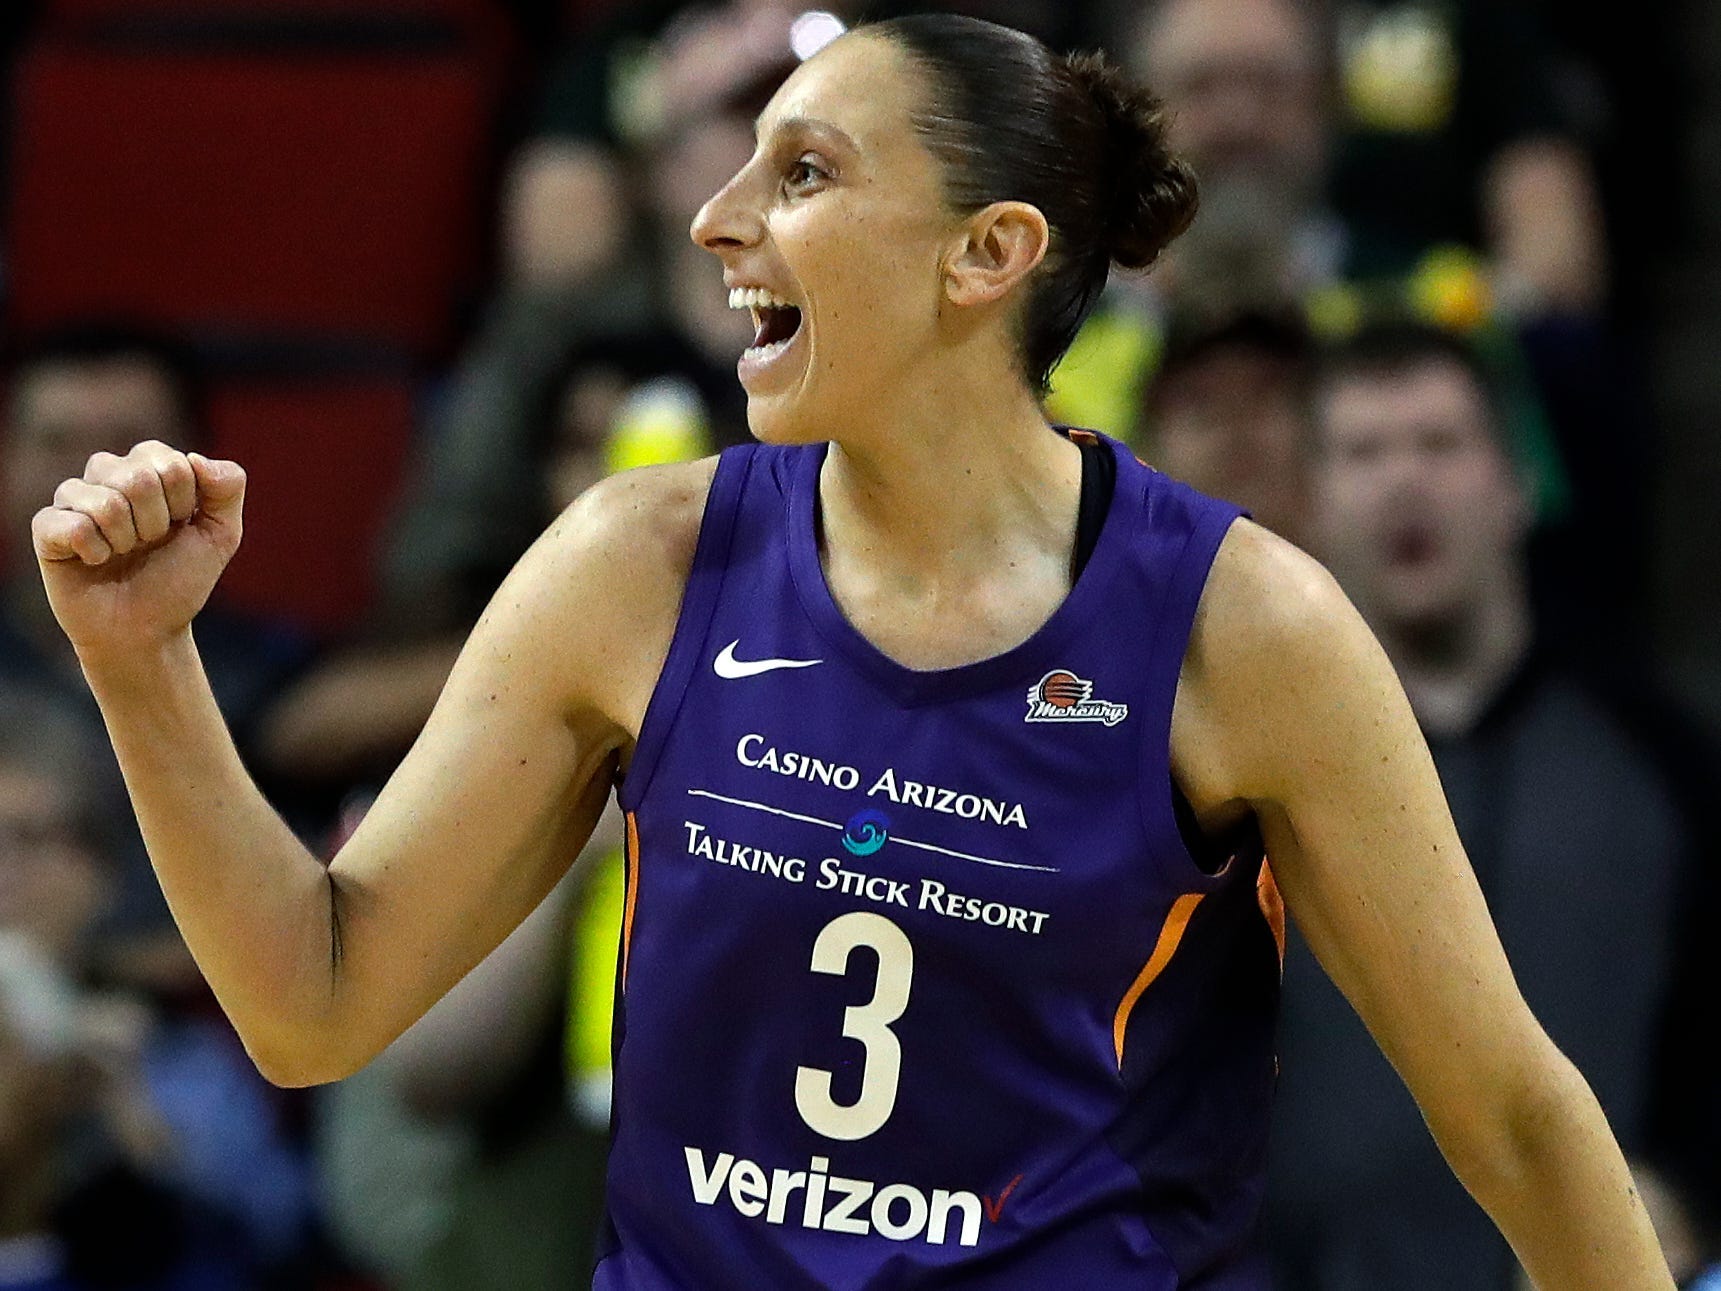 The WNBA's Diana Taurasi is making a strong case to be this season's